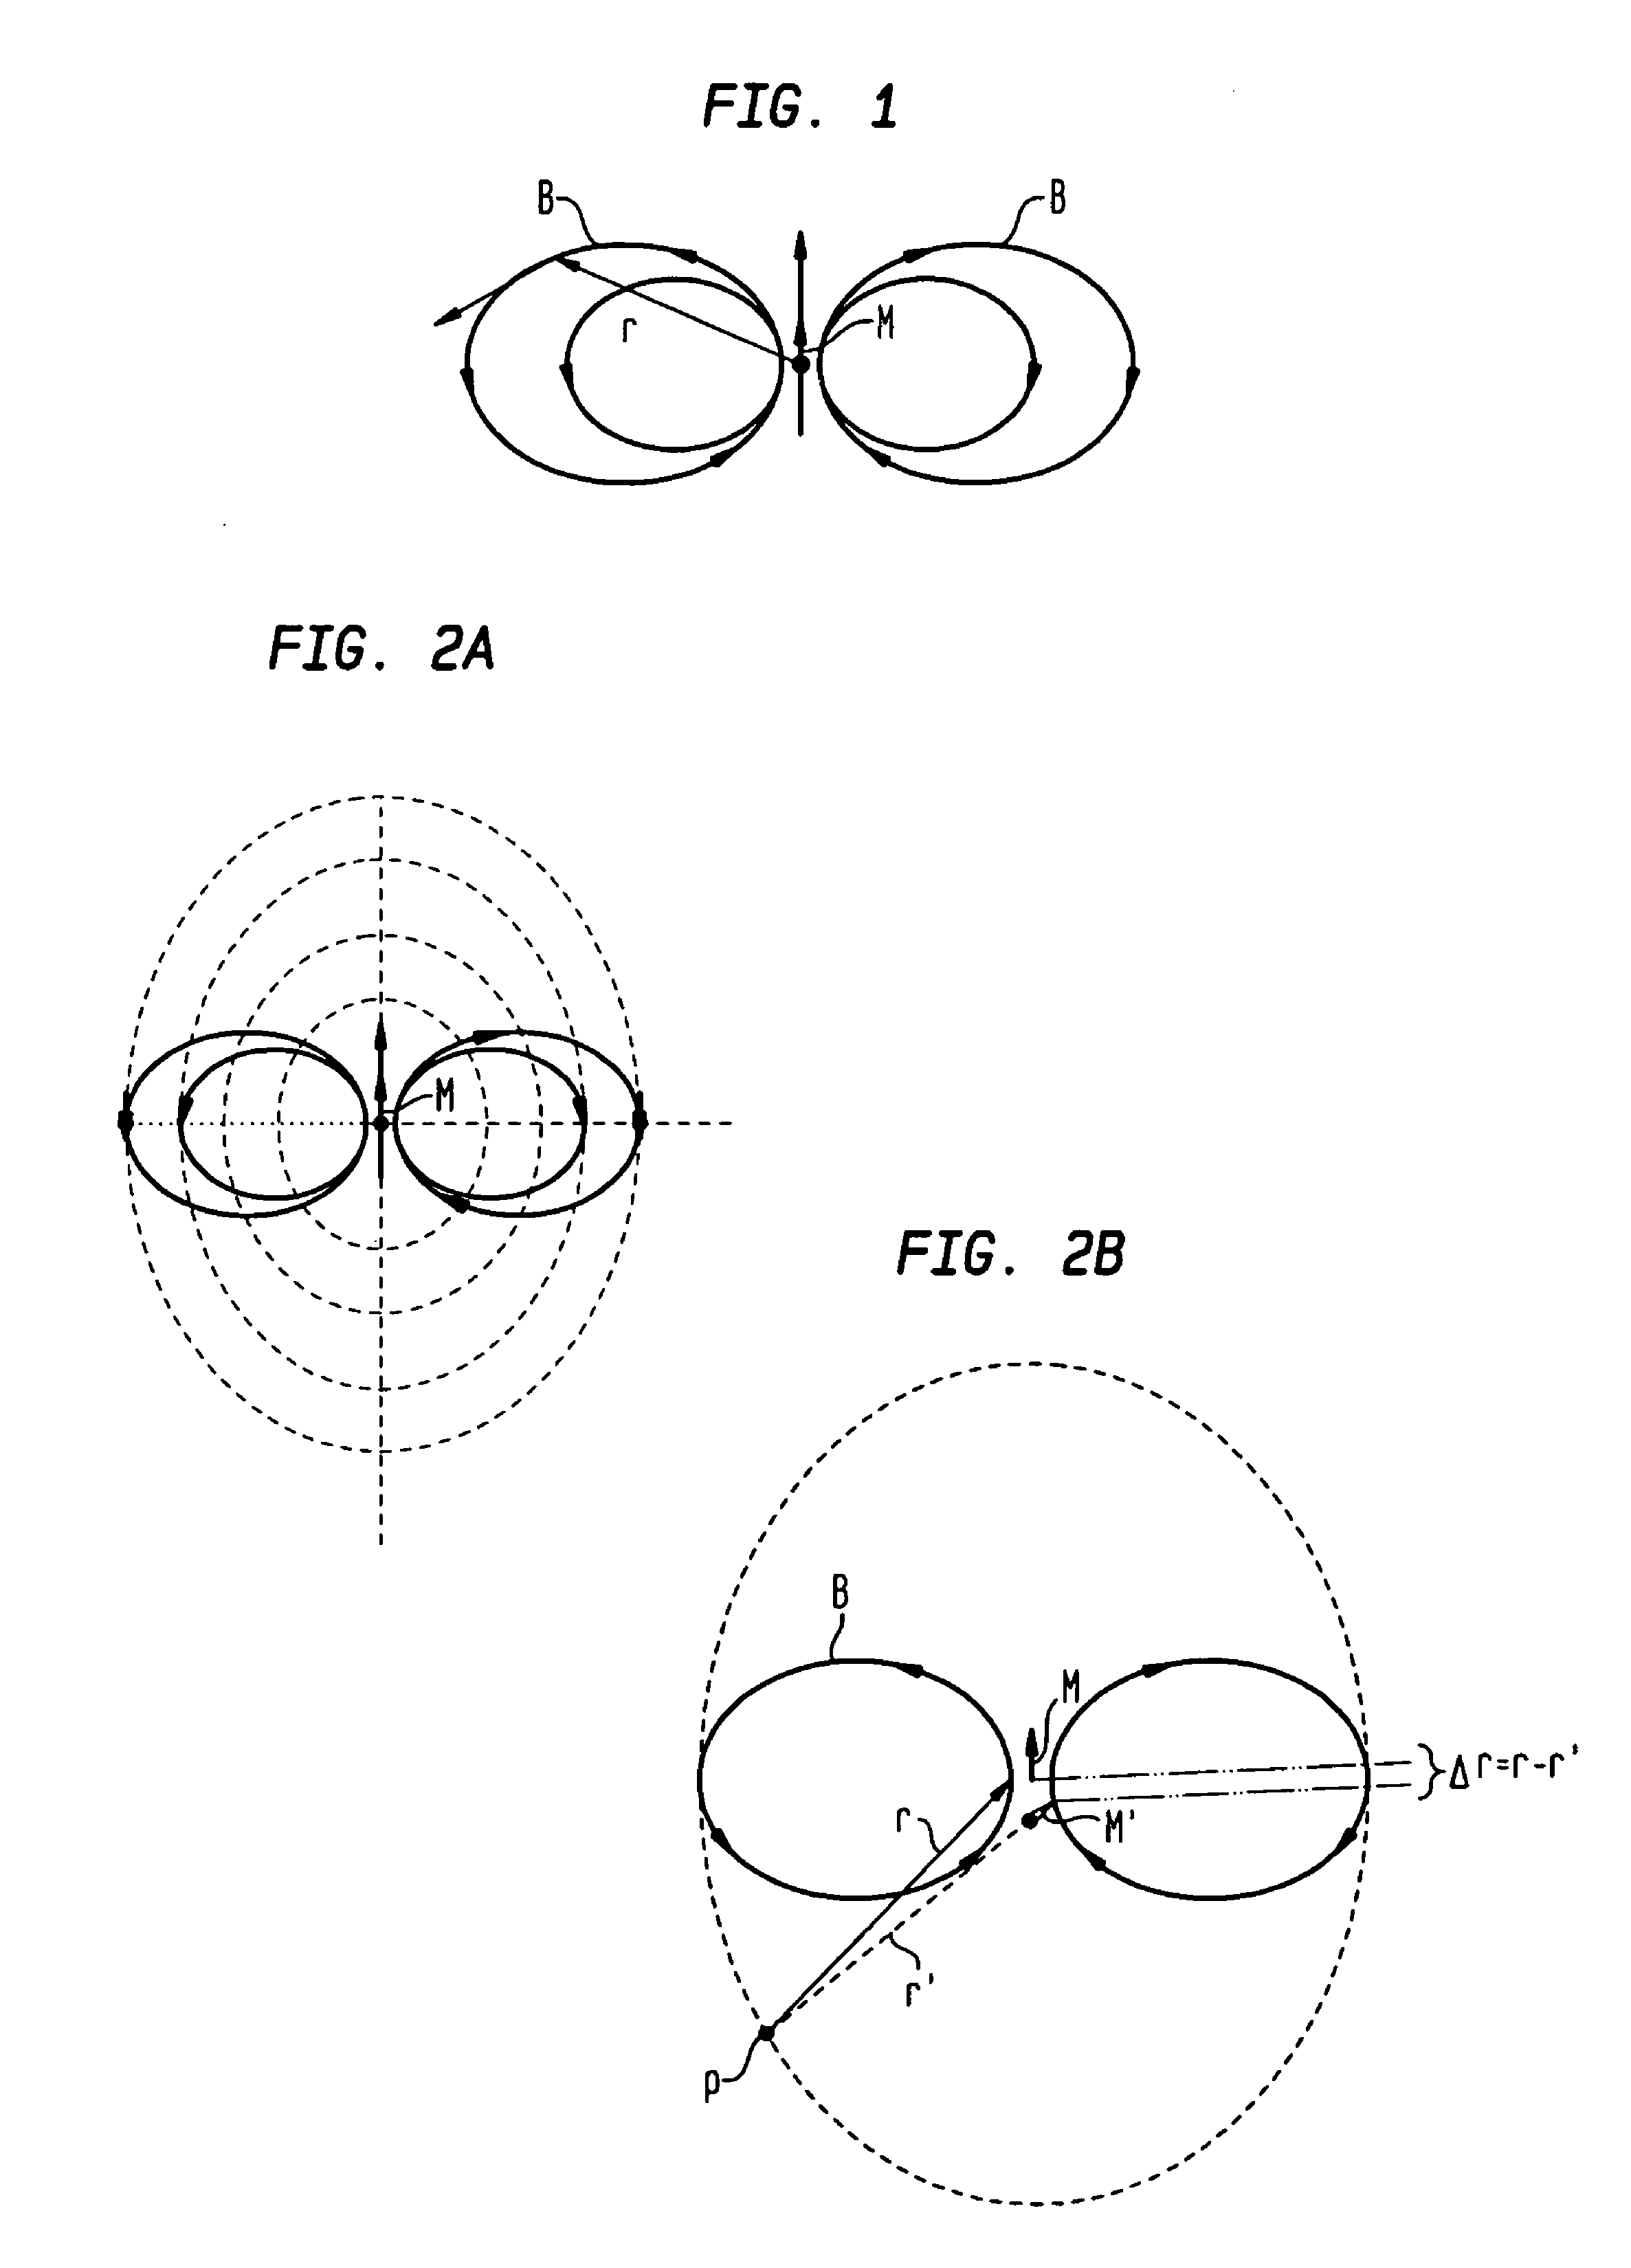 System and method using magnetic anomaly field magnitudes for detection, localization, classification and tracking of magnetic objects